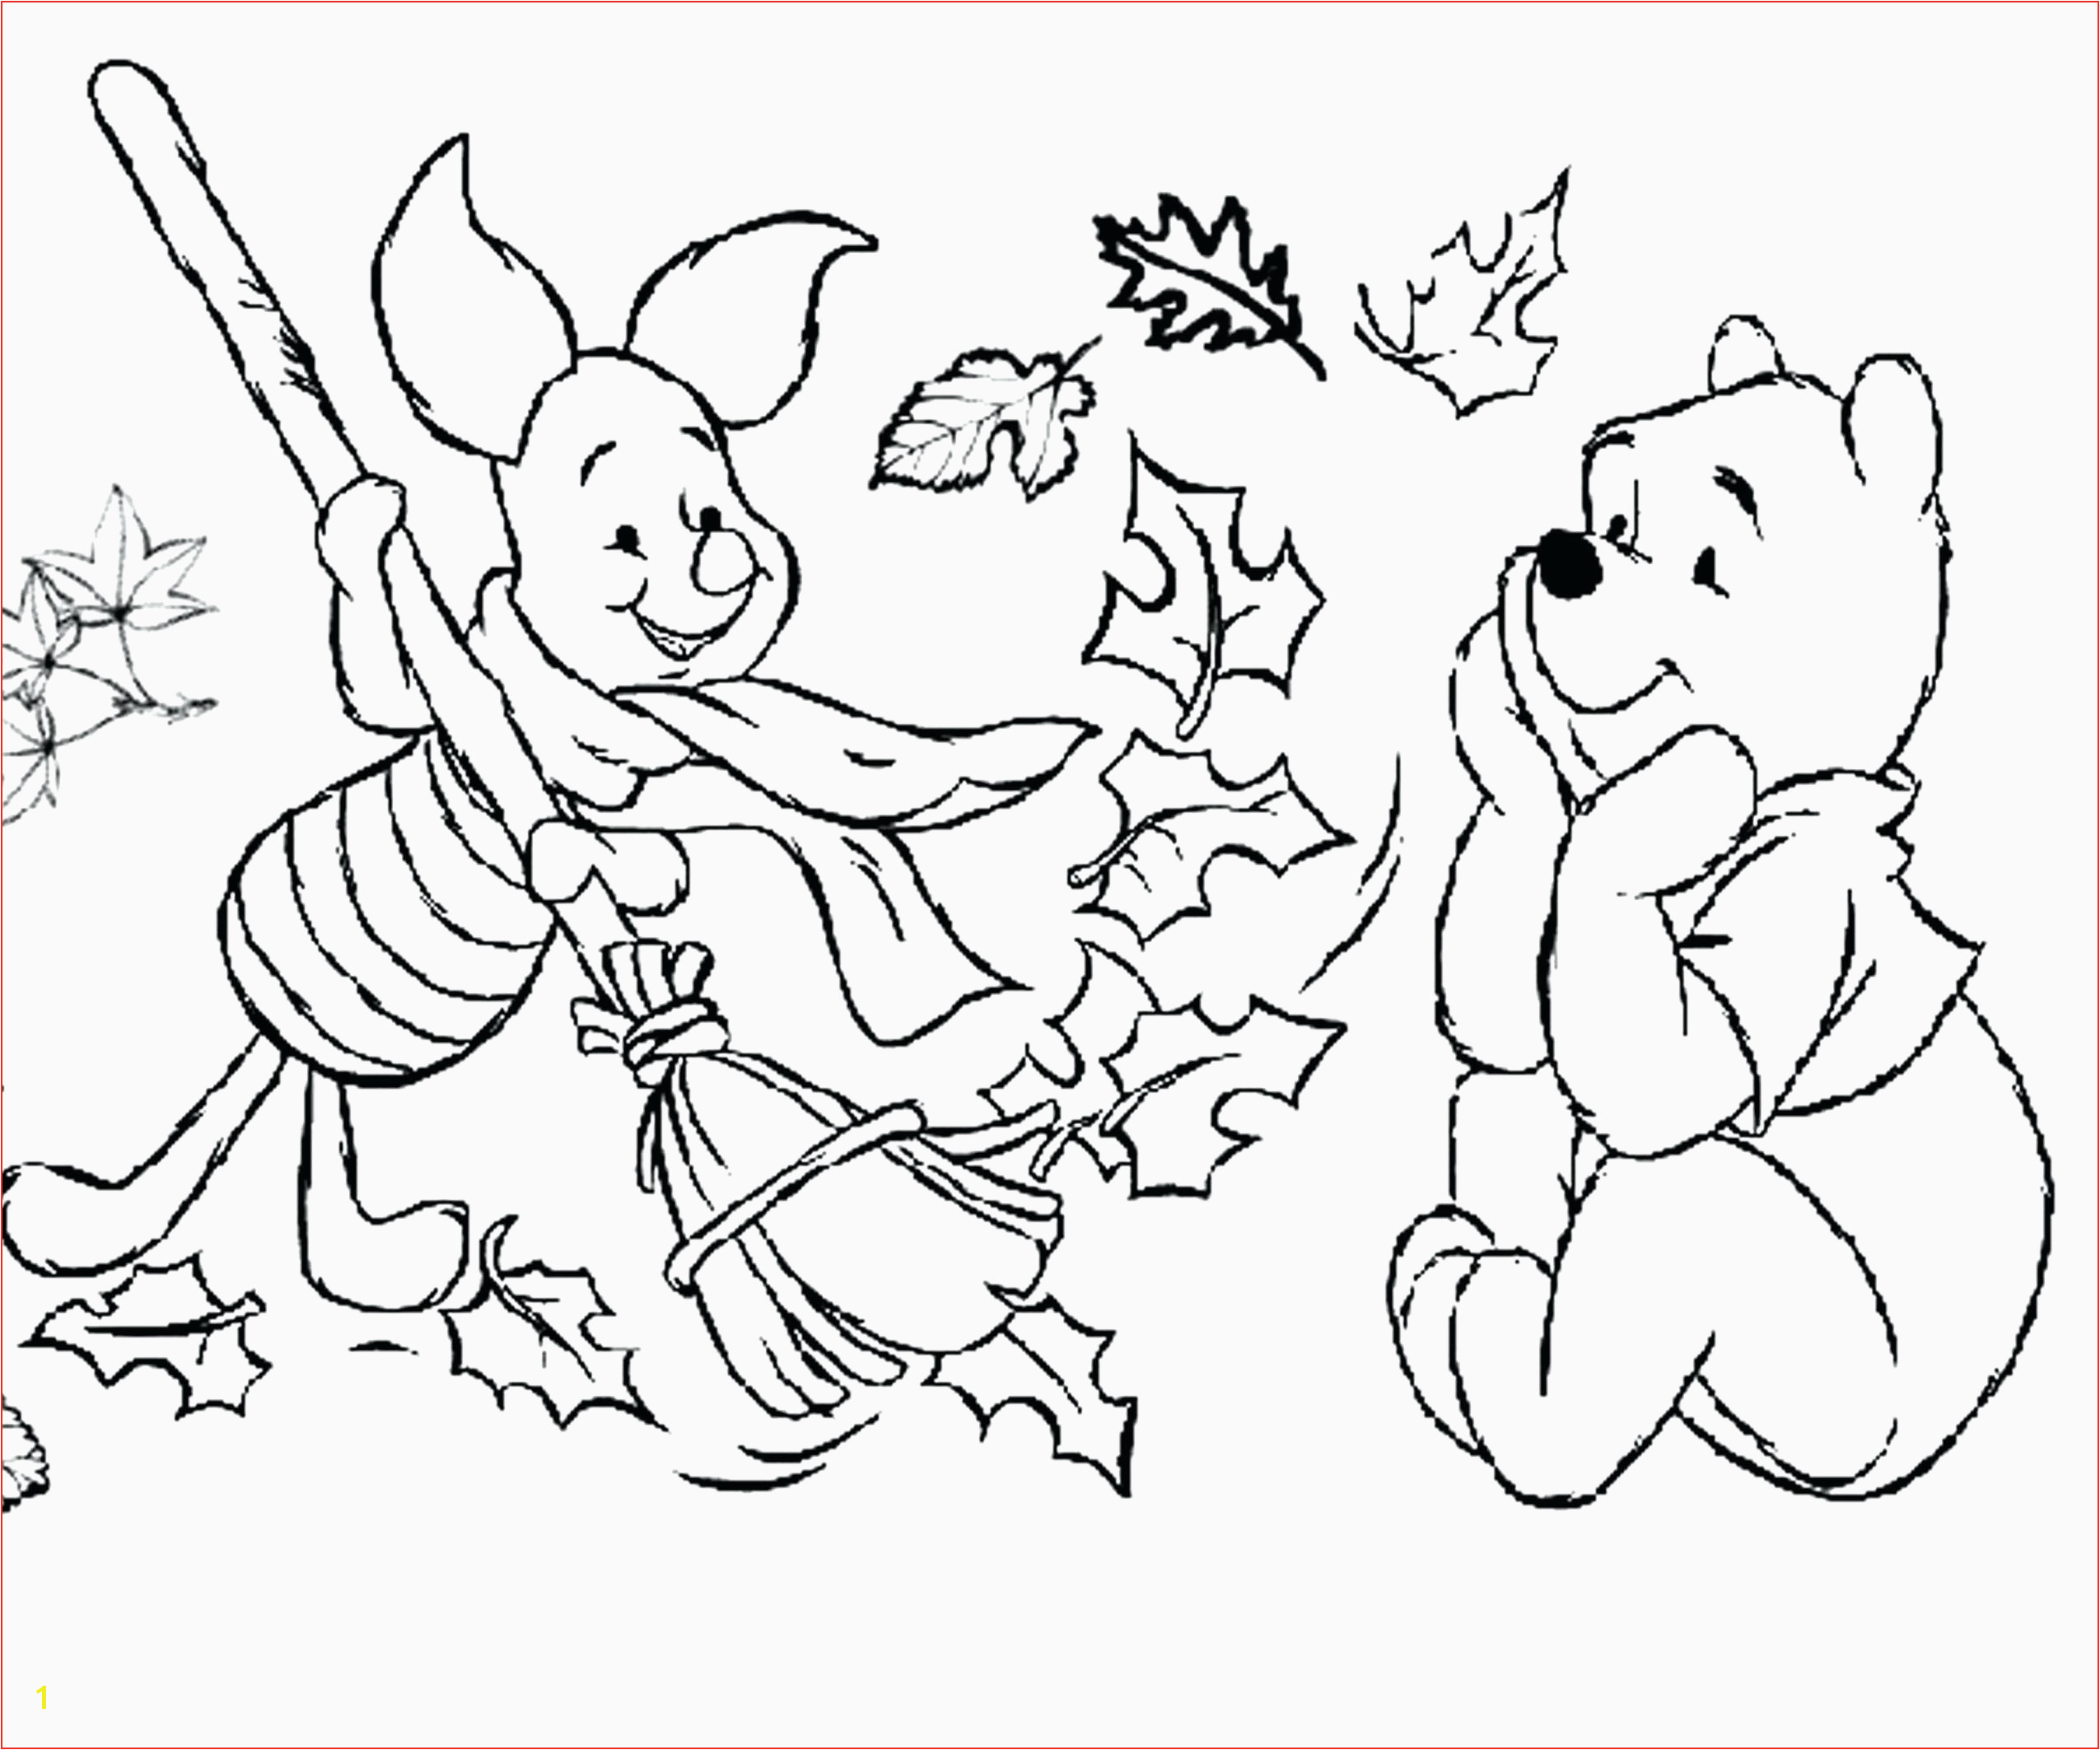 Pretty Girl Coloring Pages Coloring Sheets for Girls Batman Coloring Pages Games New